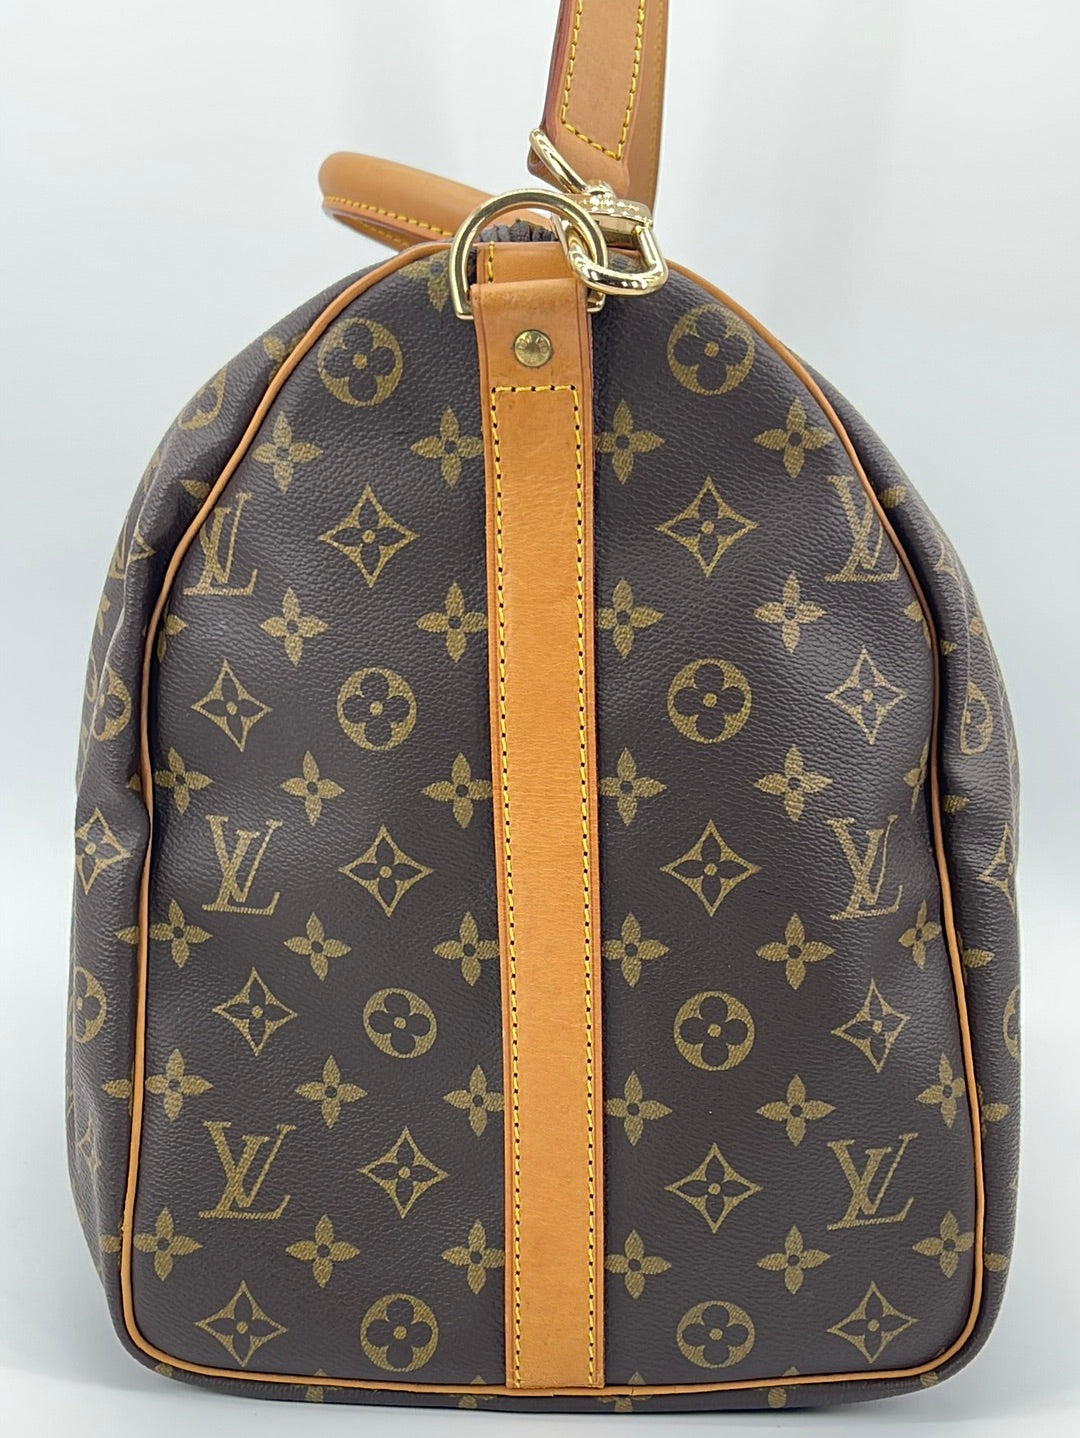 Louis_Stores - NEW IN‼️😍😍 Louis Vuitton Keepall Bandolier 50 Duffle Bag  Available Quality Is Top Notch Comes With Full Box And Packaging😁 Price:  50,000 Naira Size: Available for delivery Worldwide  ••